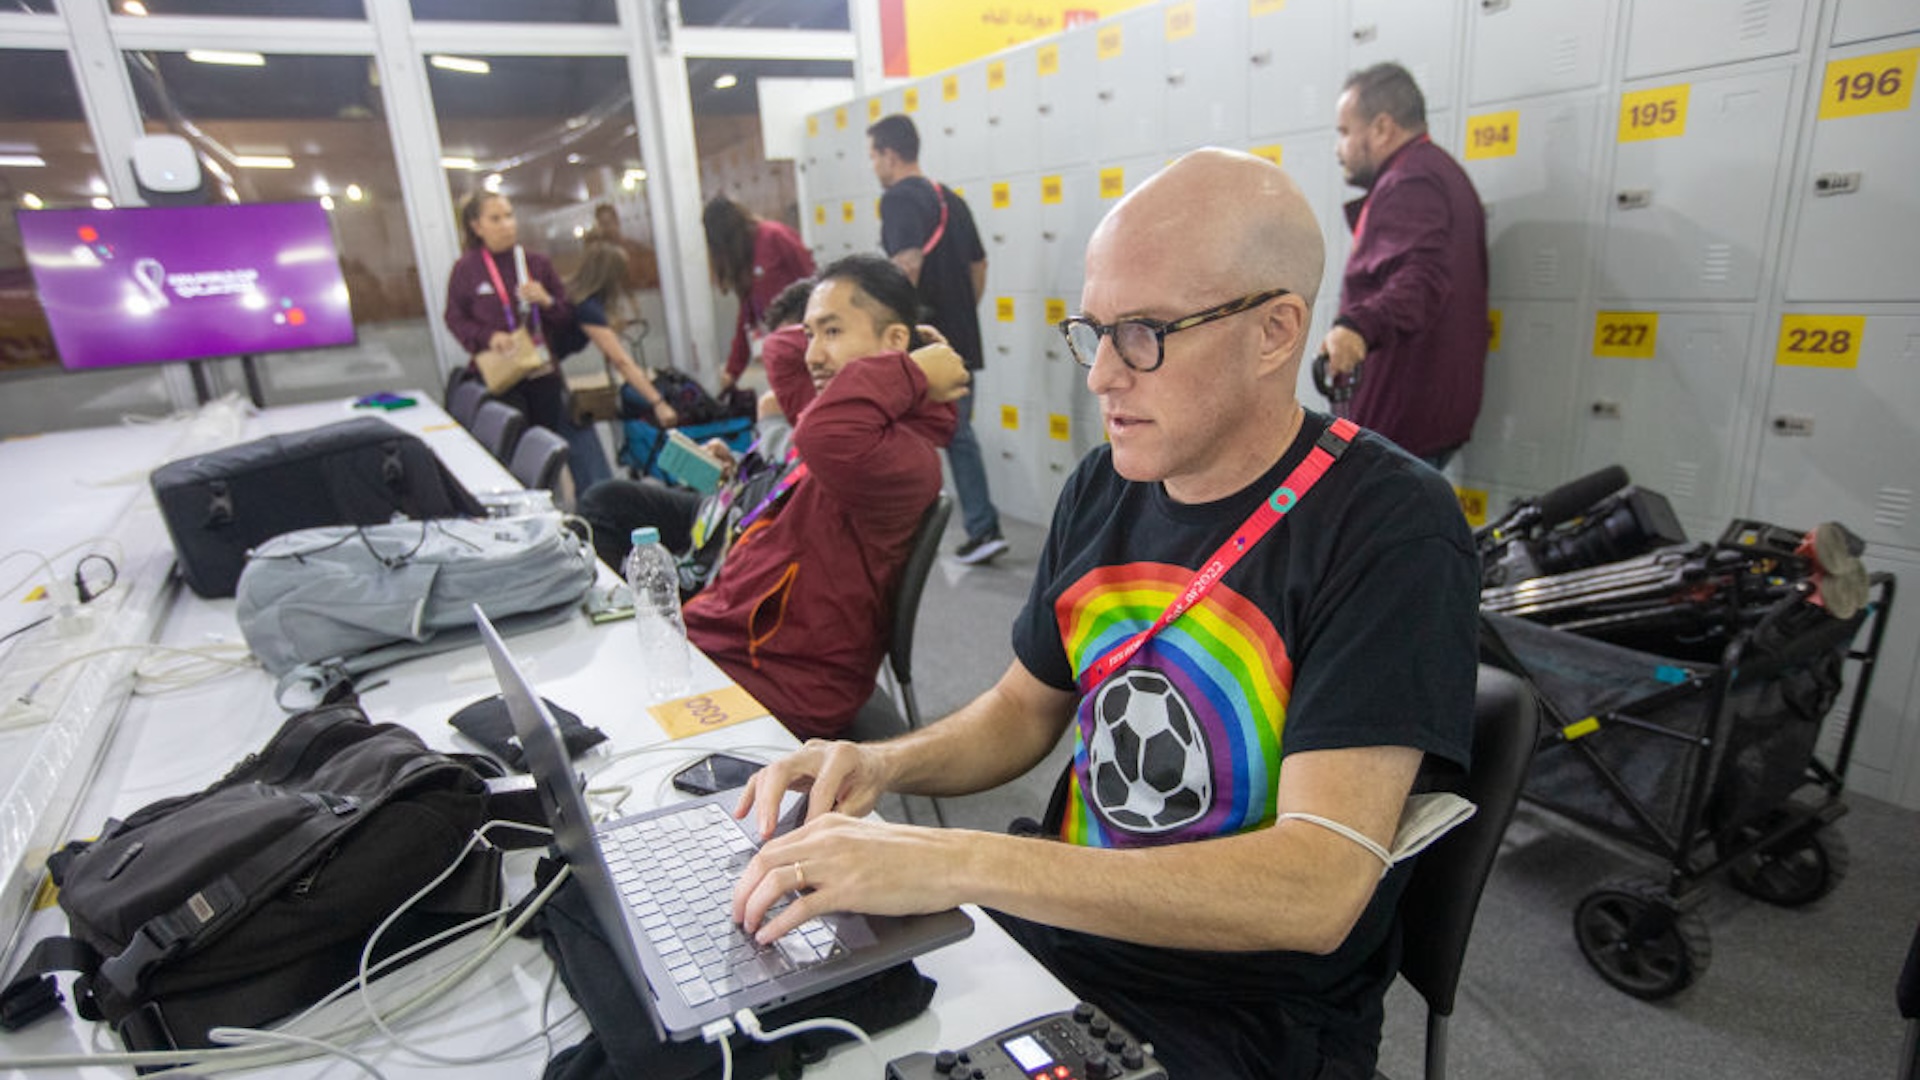 Journalist Grant Wahl (right) works in the FIFA Media Center before a FIFA World Cup Qatar 2022 Group B match between Wales and USMNT at Ahmad Bin Ali Stadium on November 21, 2022 in Al Rayyan, Qatar. He had been detained earlier by stadium security for wearing a rainbow-colored t-shirt before later being allowed to enter the stadium.